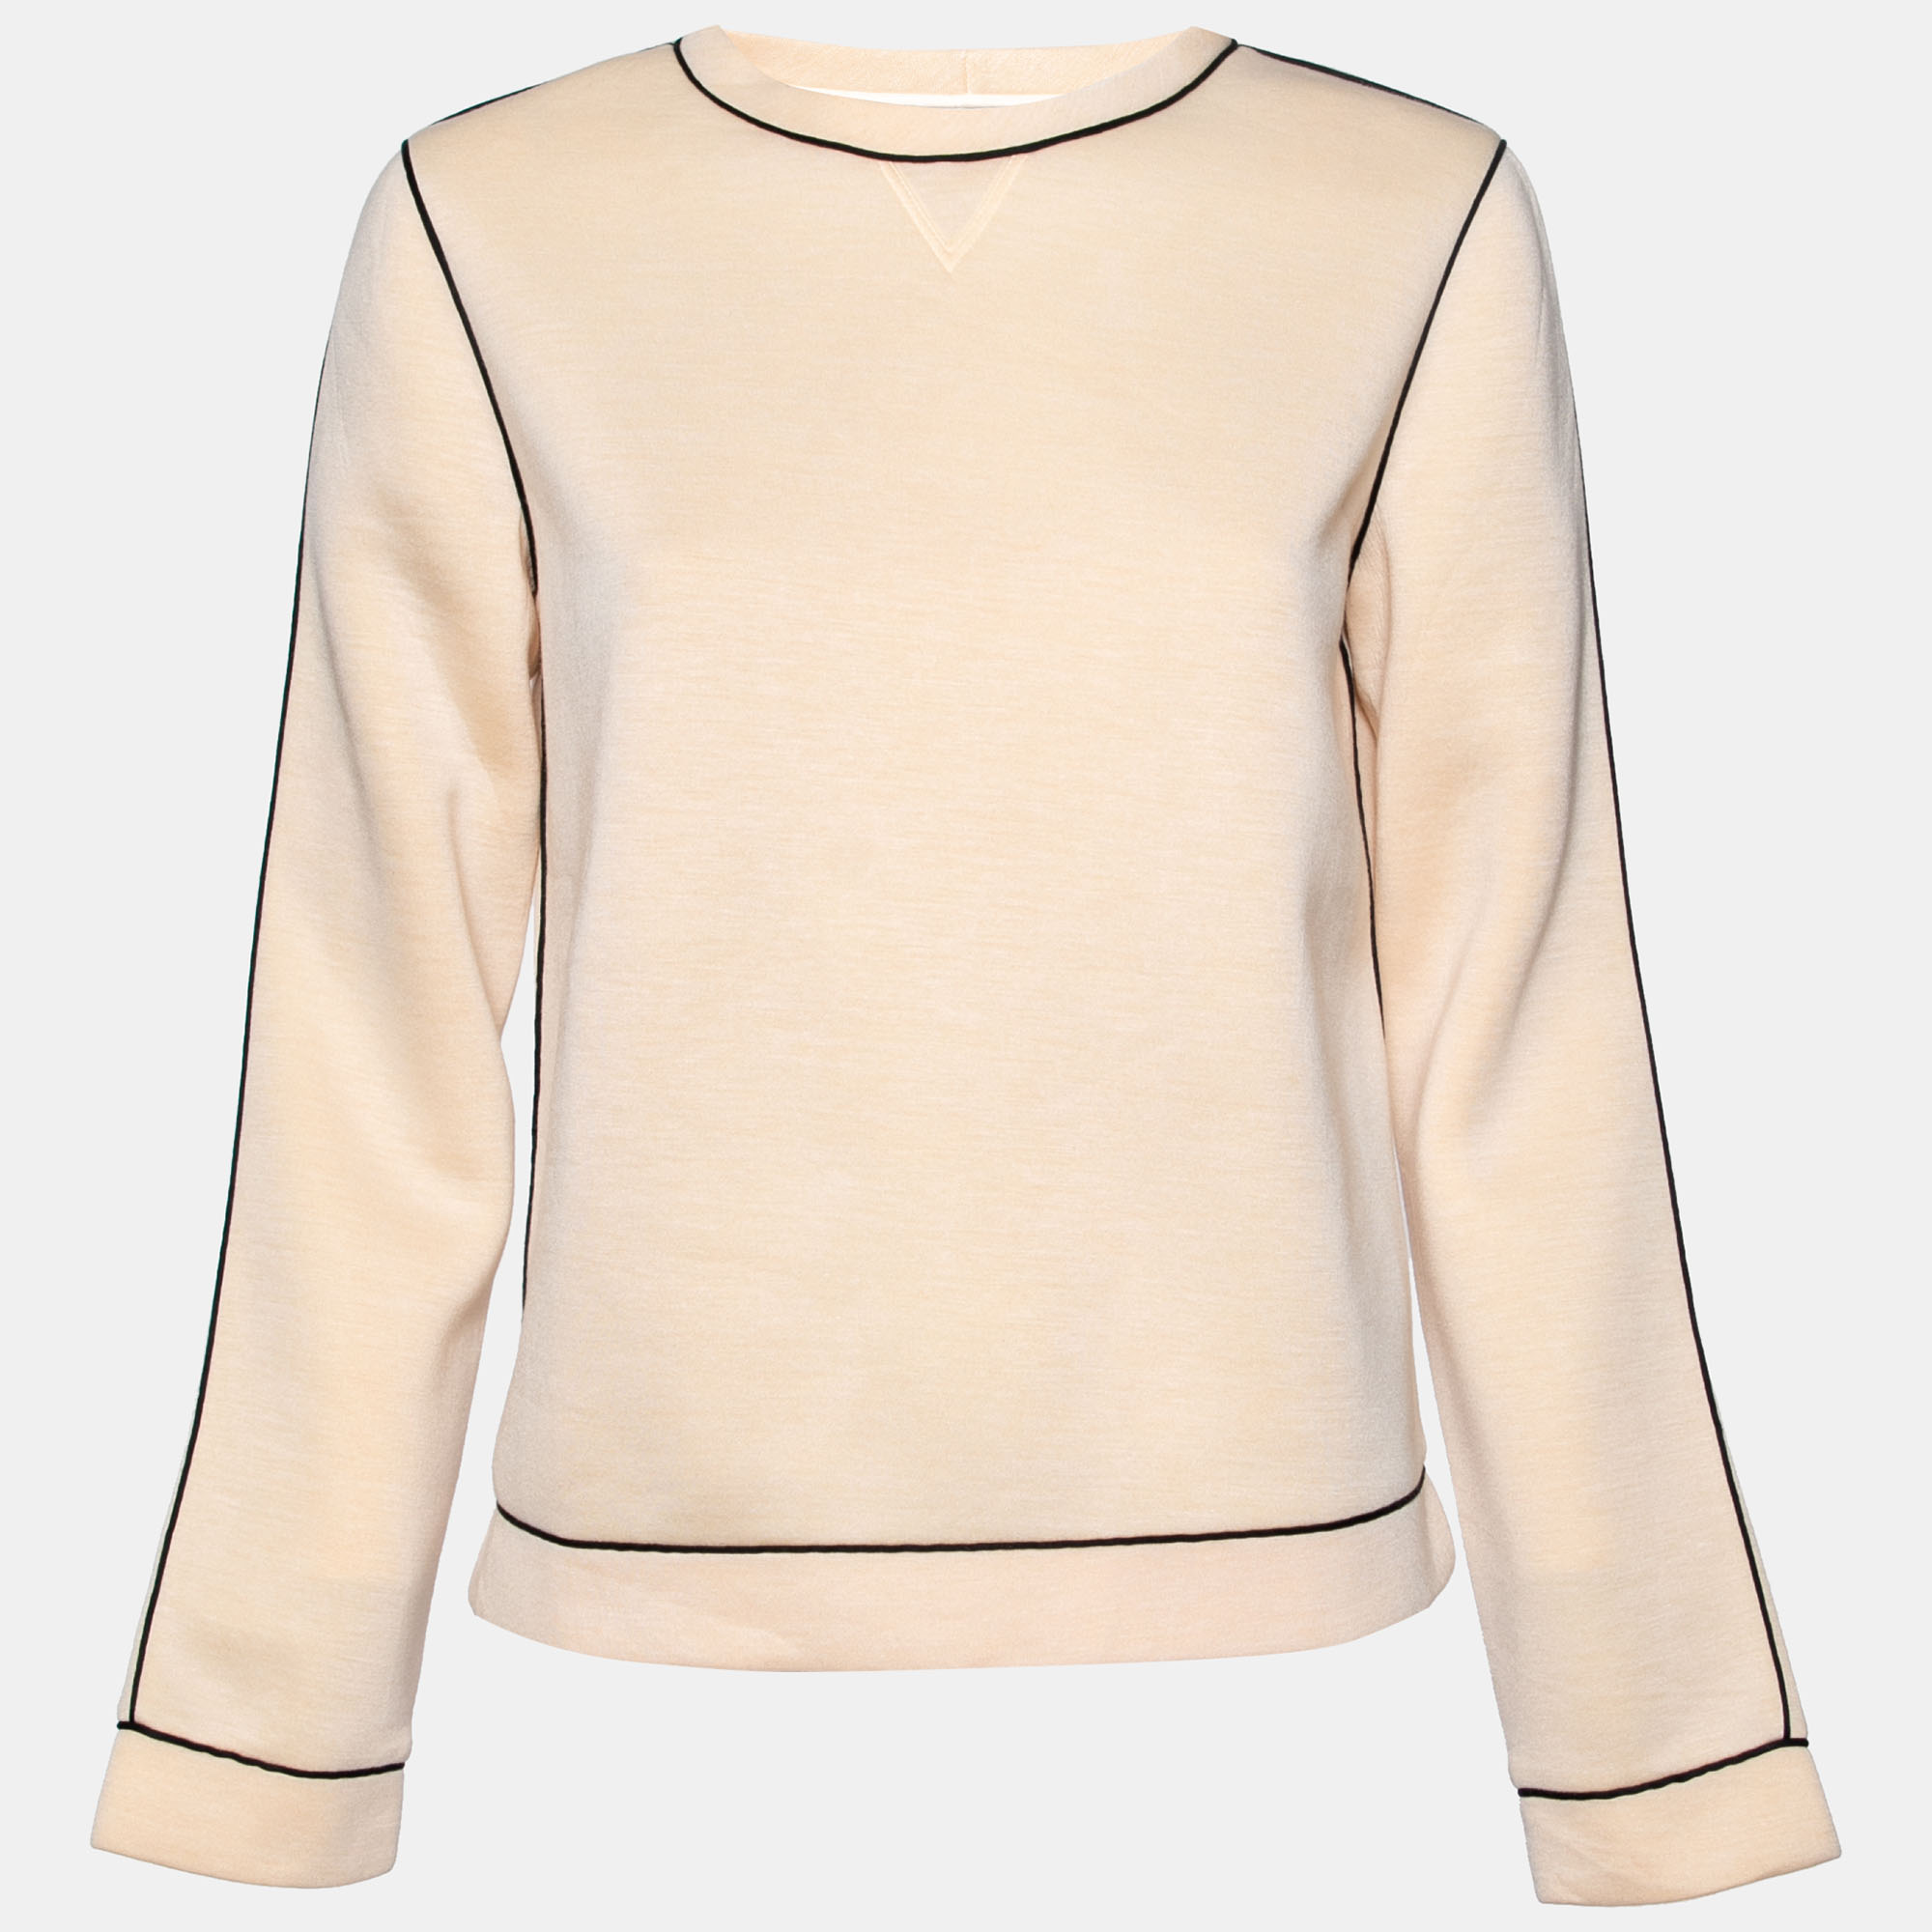 Valentino Cream Neoprene Contrast Piping Detailed Long Sleeve Top S